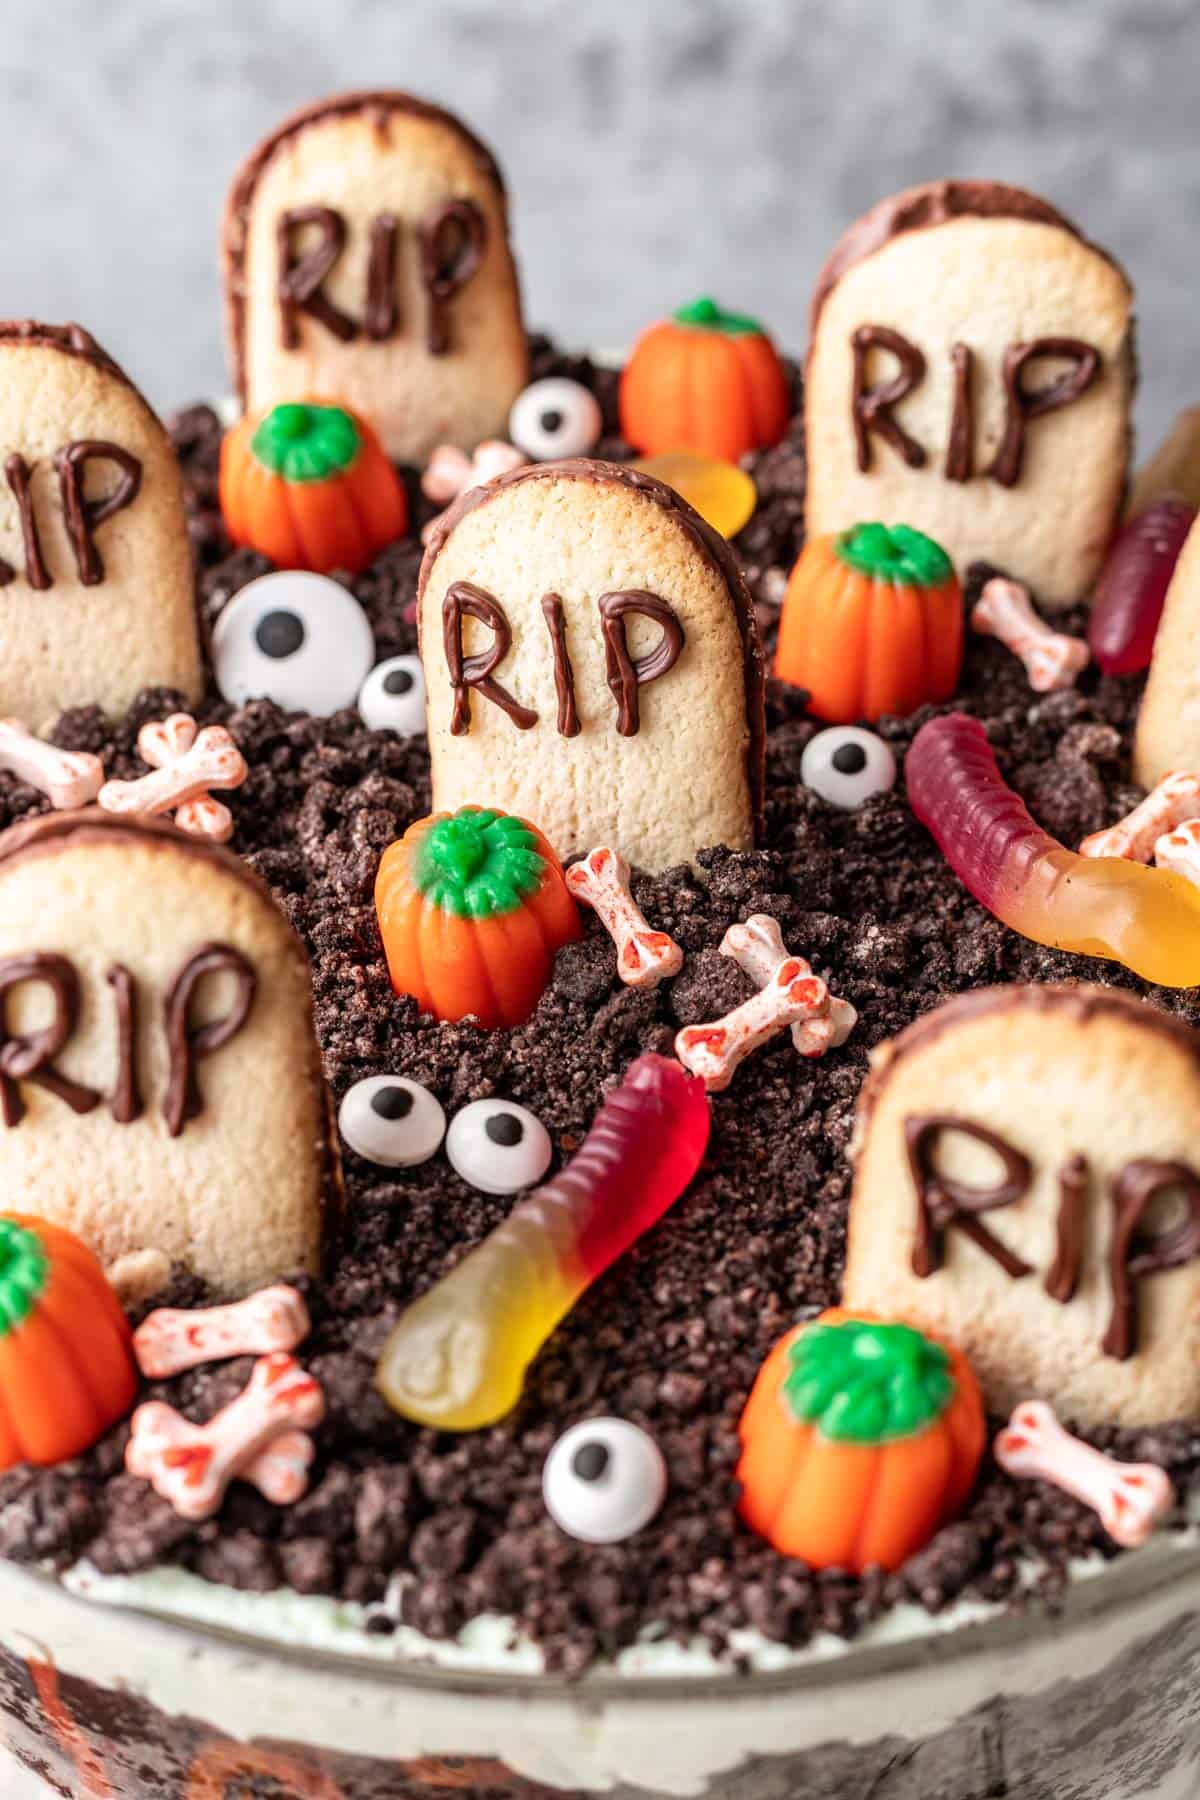 Top of the halloween trifle to show the "graveyard" of oreo dirt, cookie tombstones, candy bones, eyes, and worms.